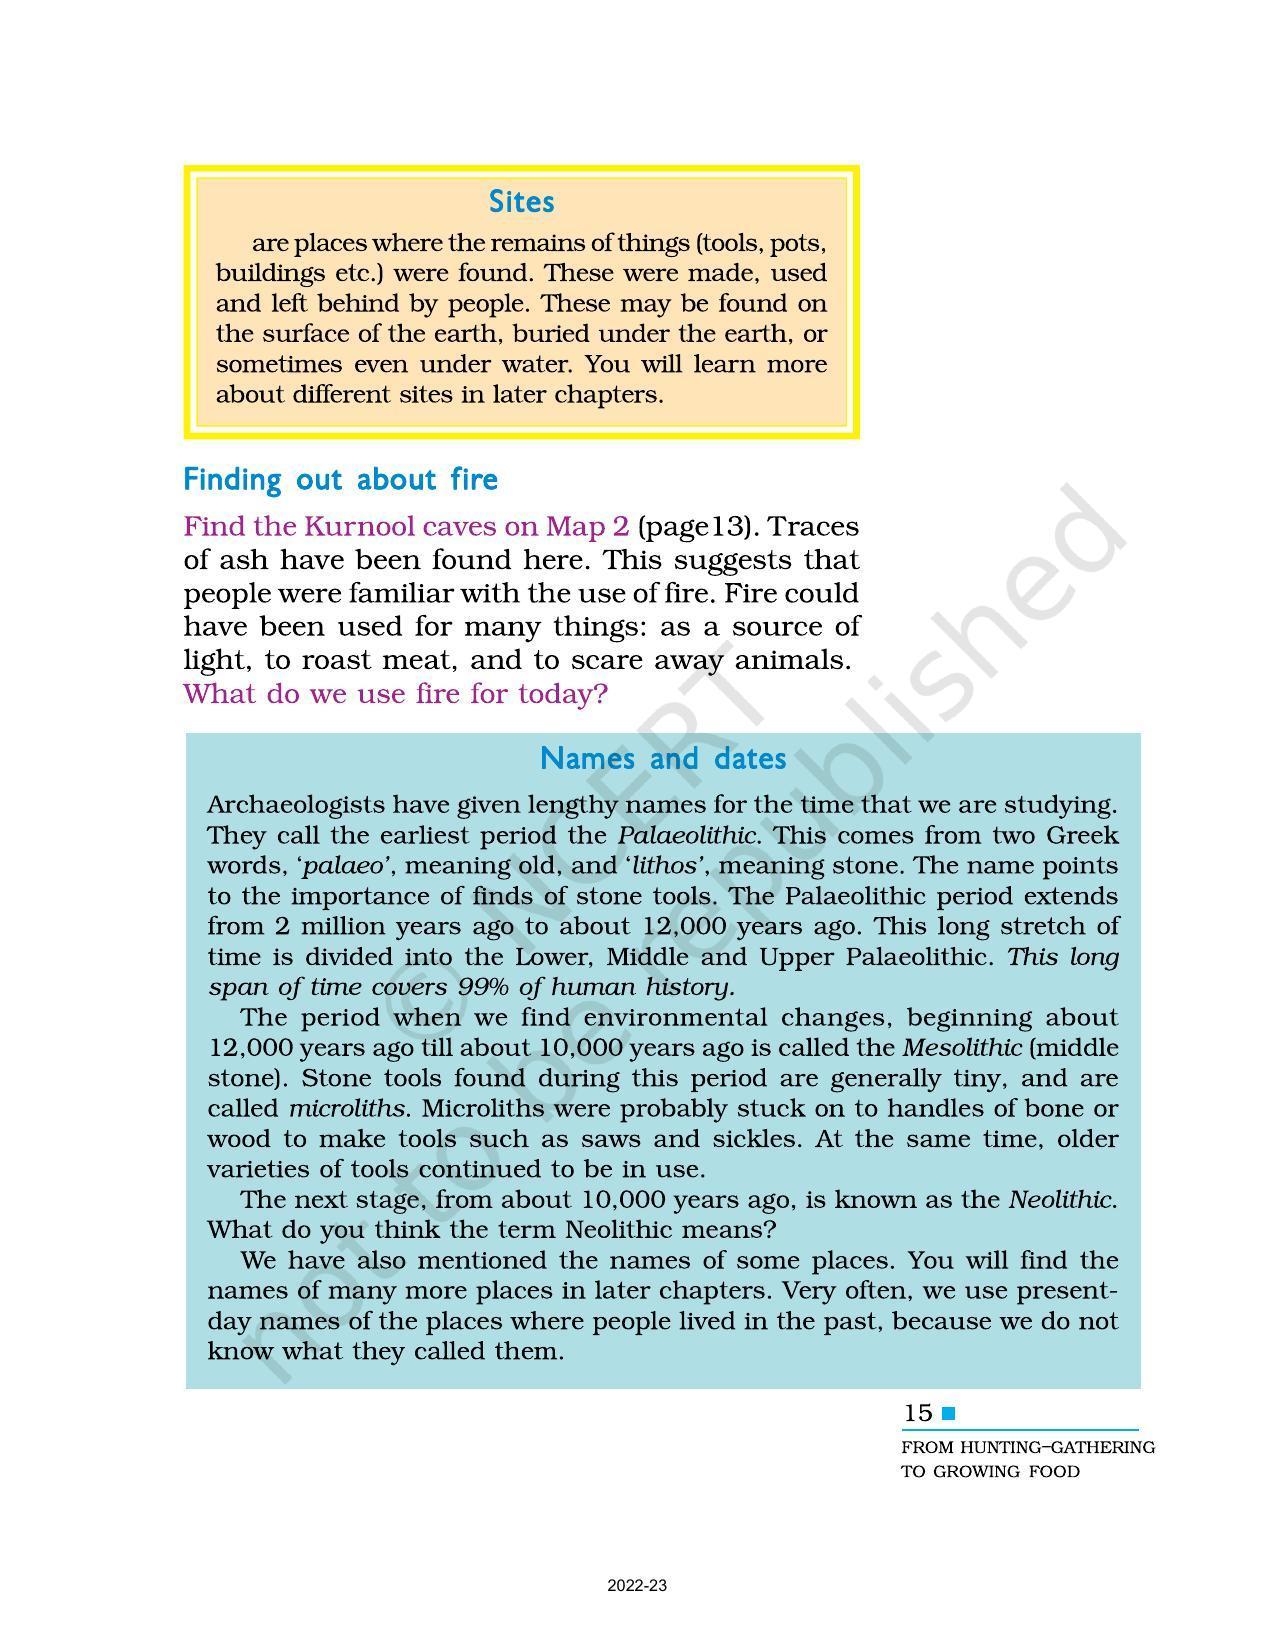 NCERT Book for Class 6 Social Science(History) : Chapter 2-On the Trail of the Earliest People - Page 5